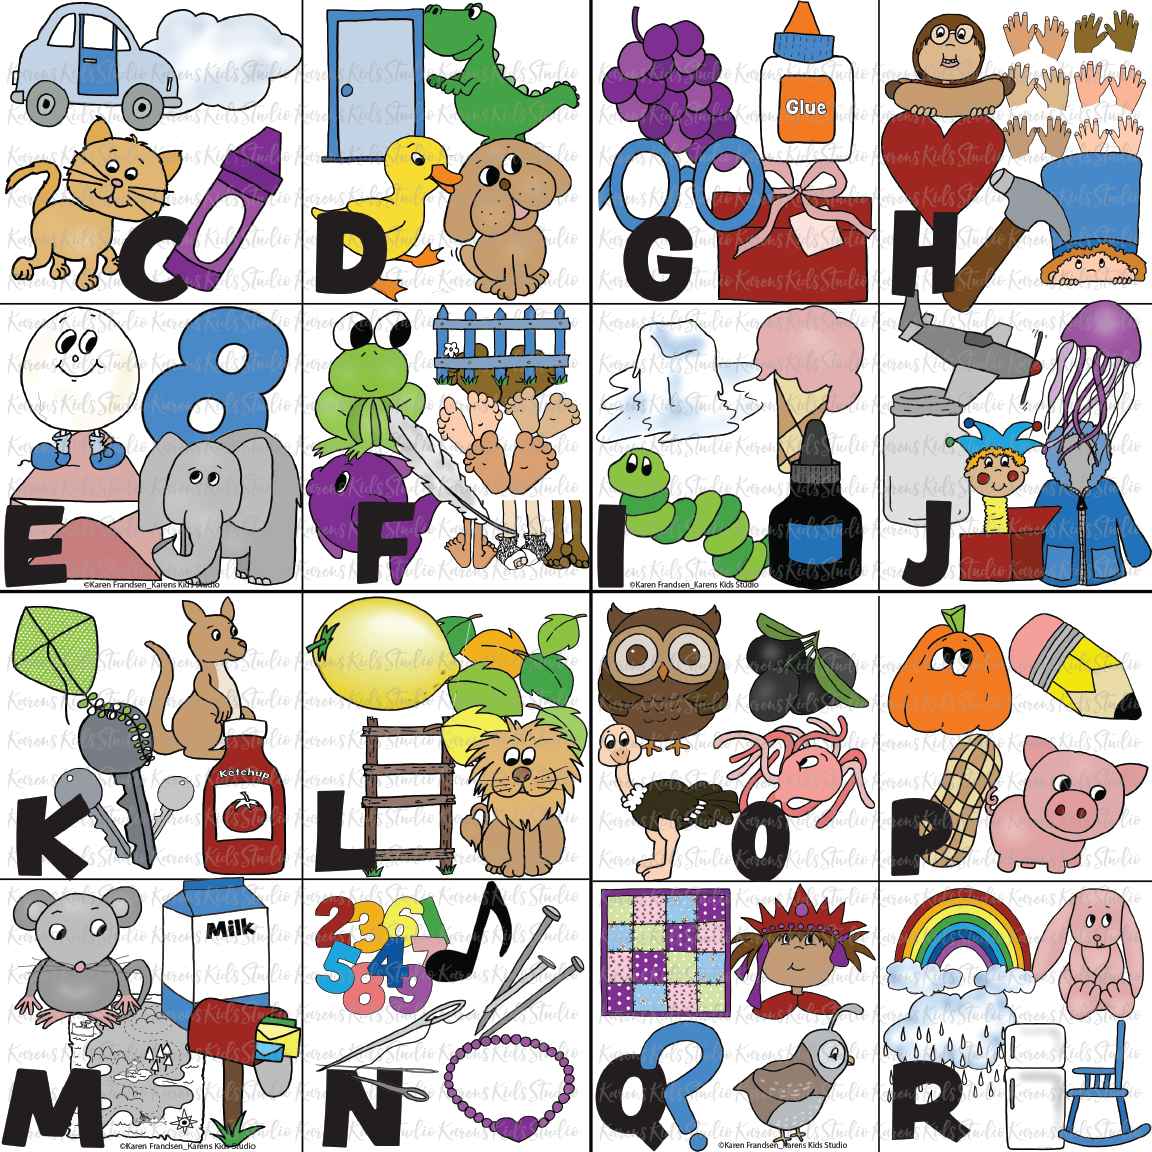 Colorful alphabet letters and pictures with 4-7 pictures per letter.